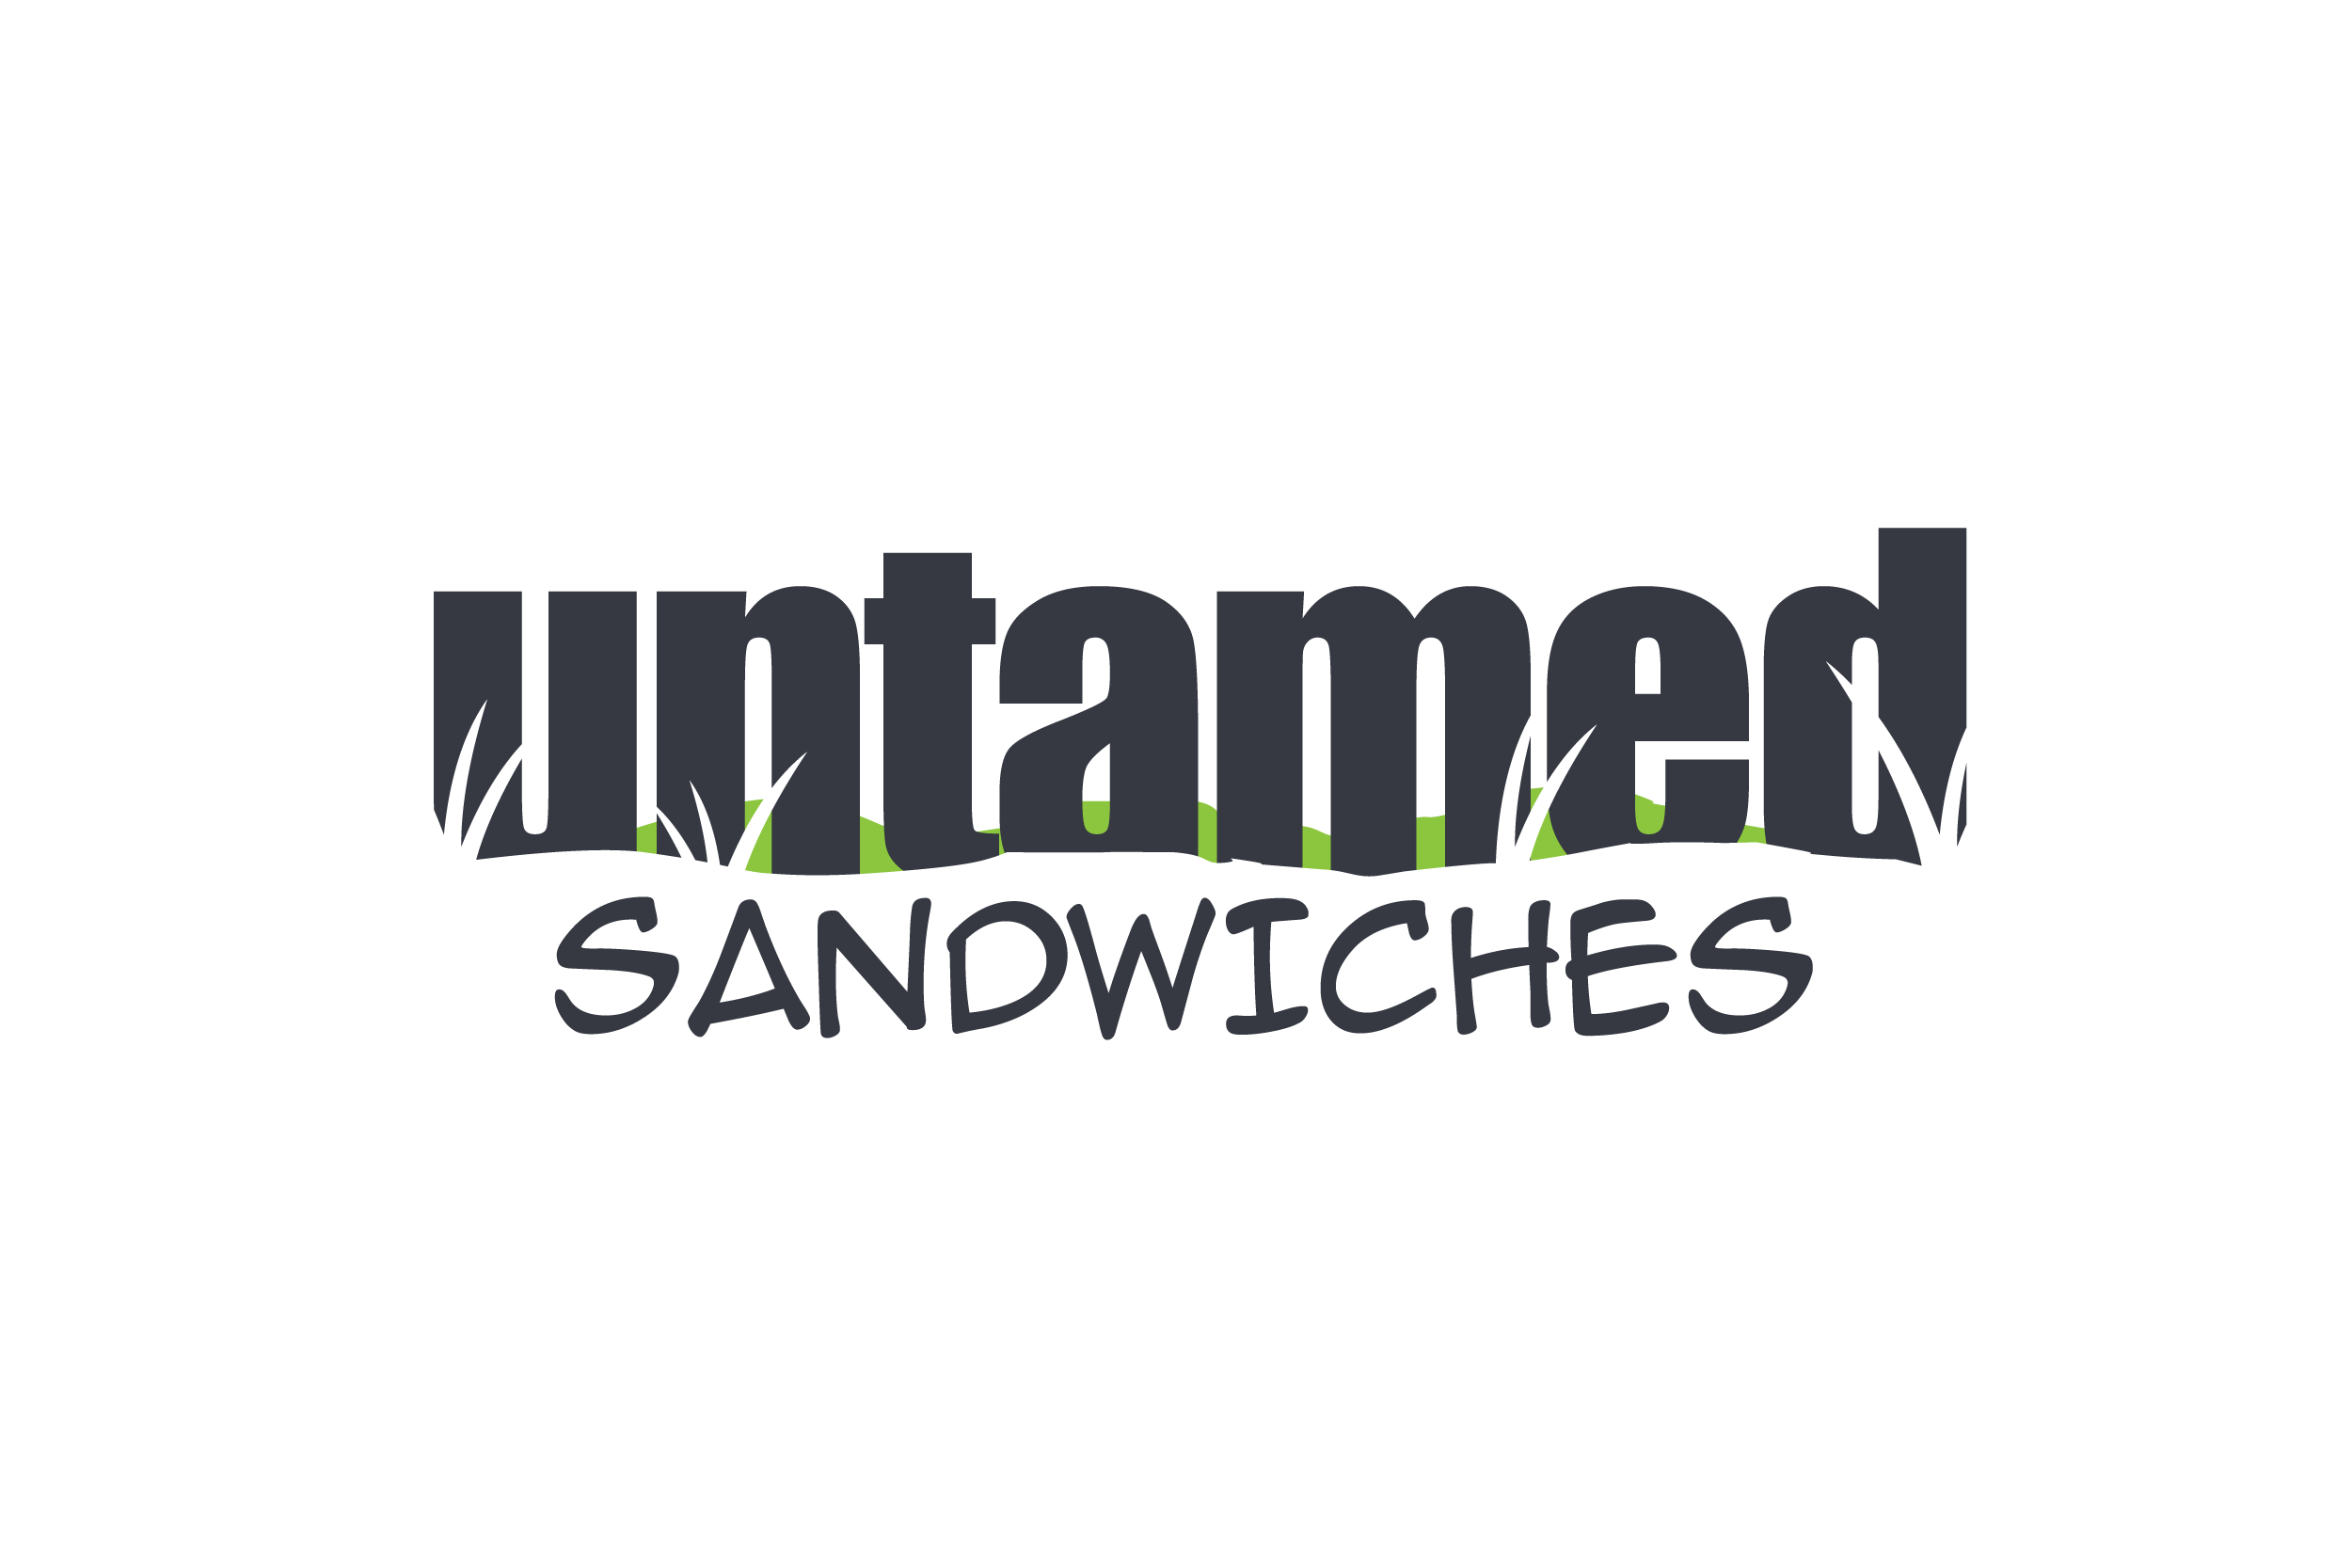 How You Doin’? Vol 3 Andy Jacobi, Co-Founder of Untamed Sandwiches